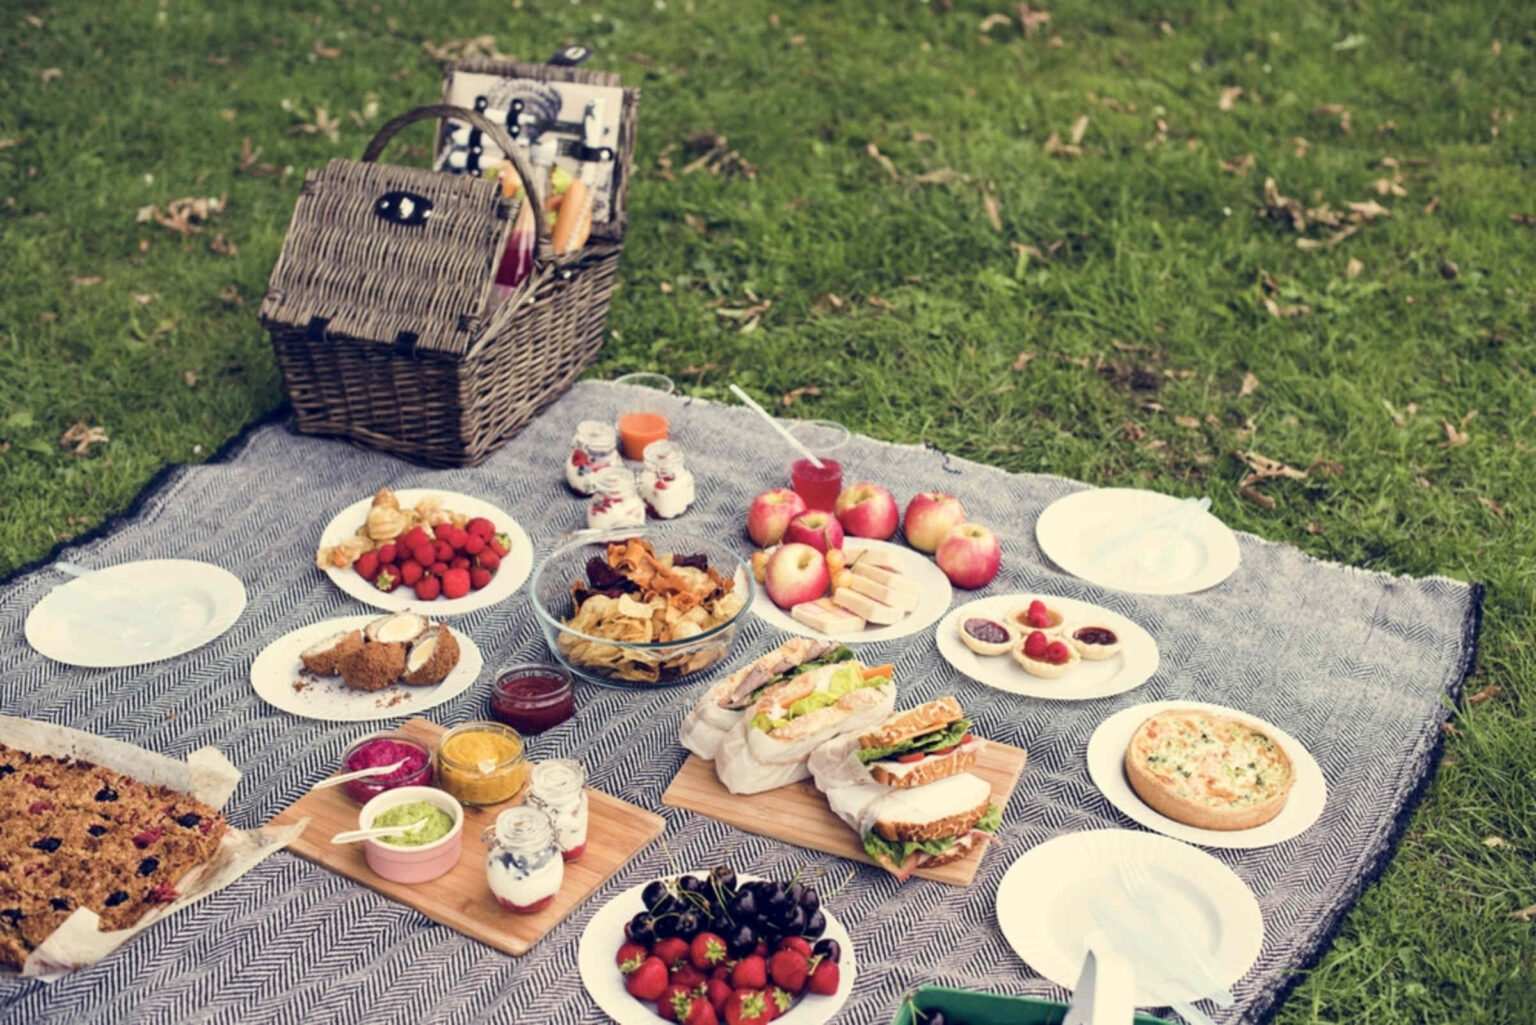 You have finally found your soul mate and you really want to sweep them off their feet this Valentine’s Day. Follow these simple steps to plan out the most perfect Valentine’s day picnic.